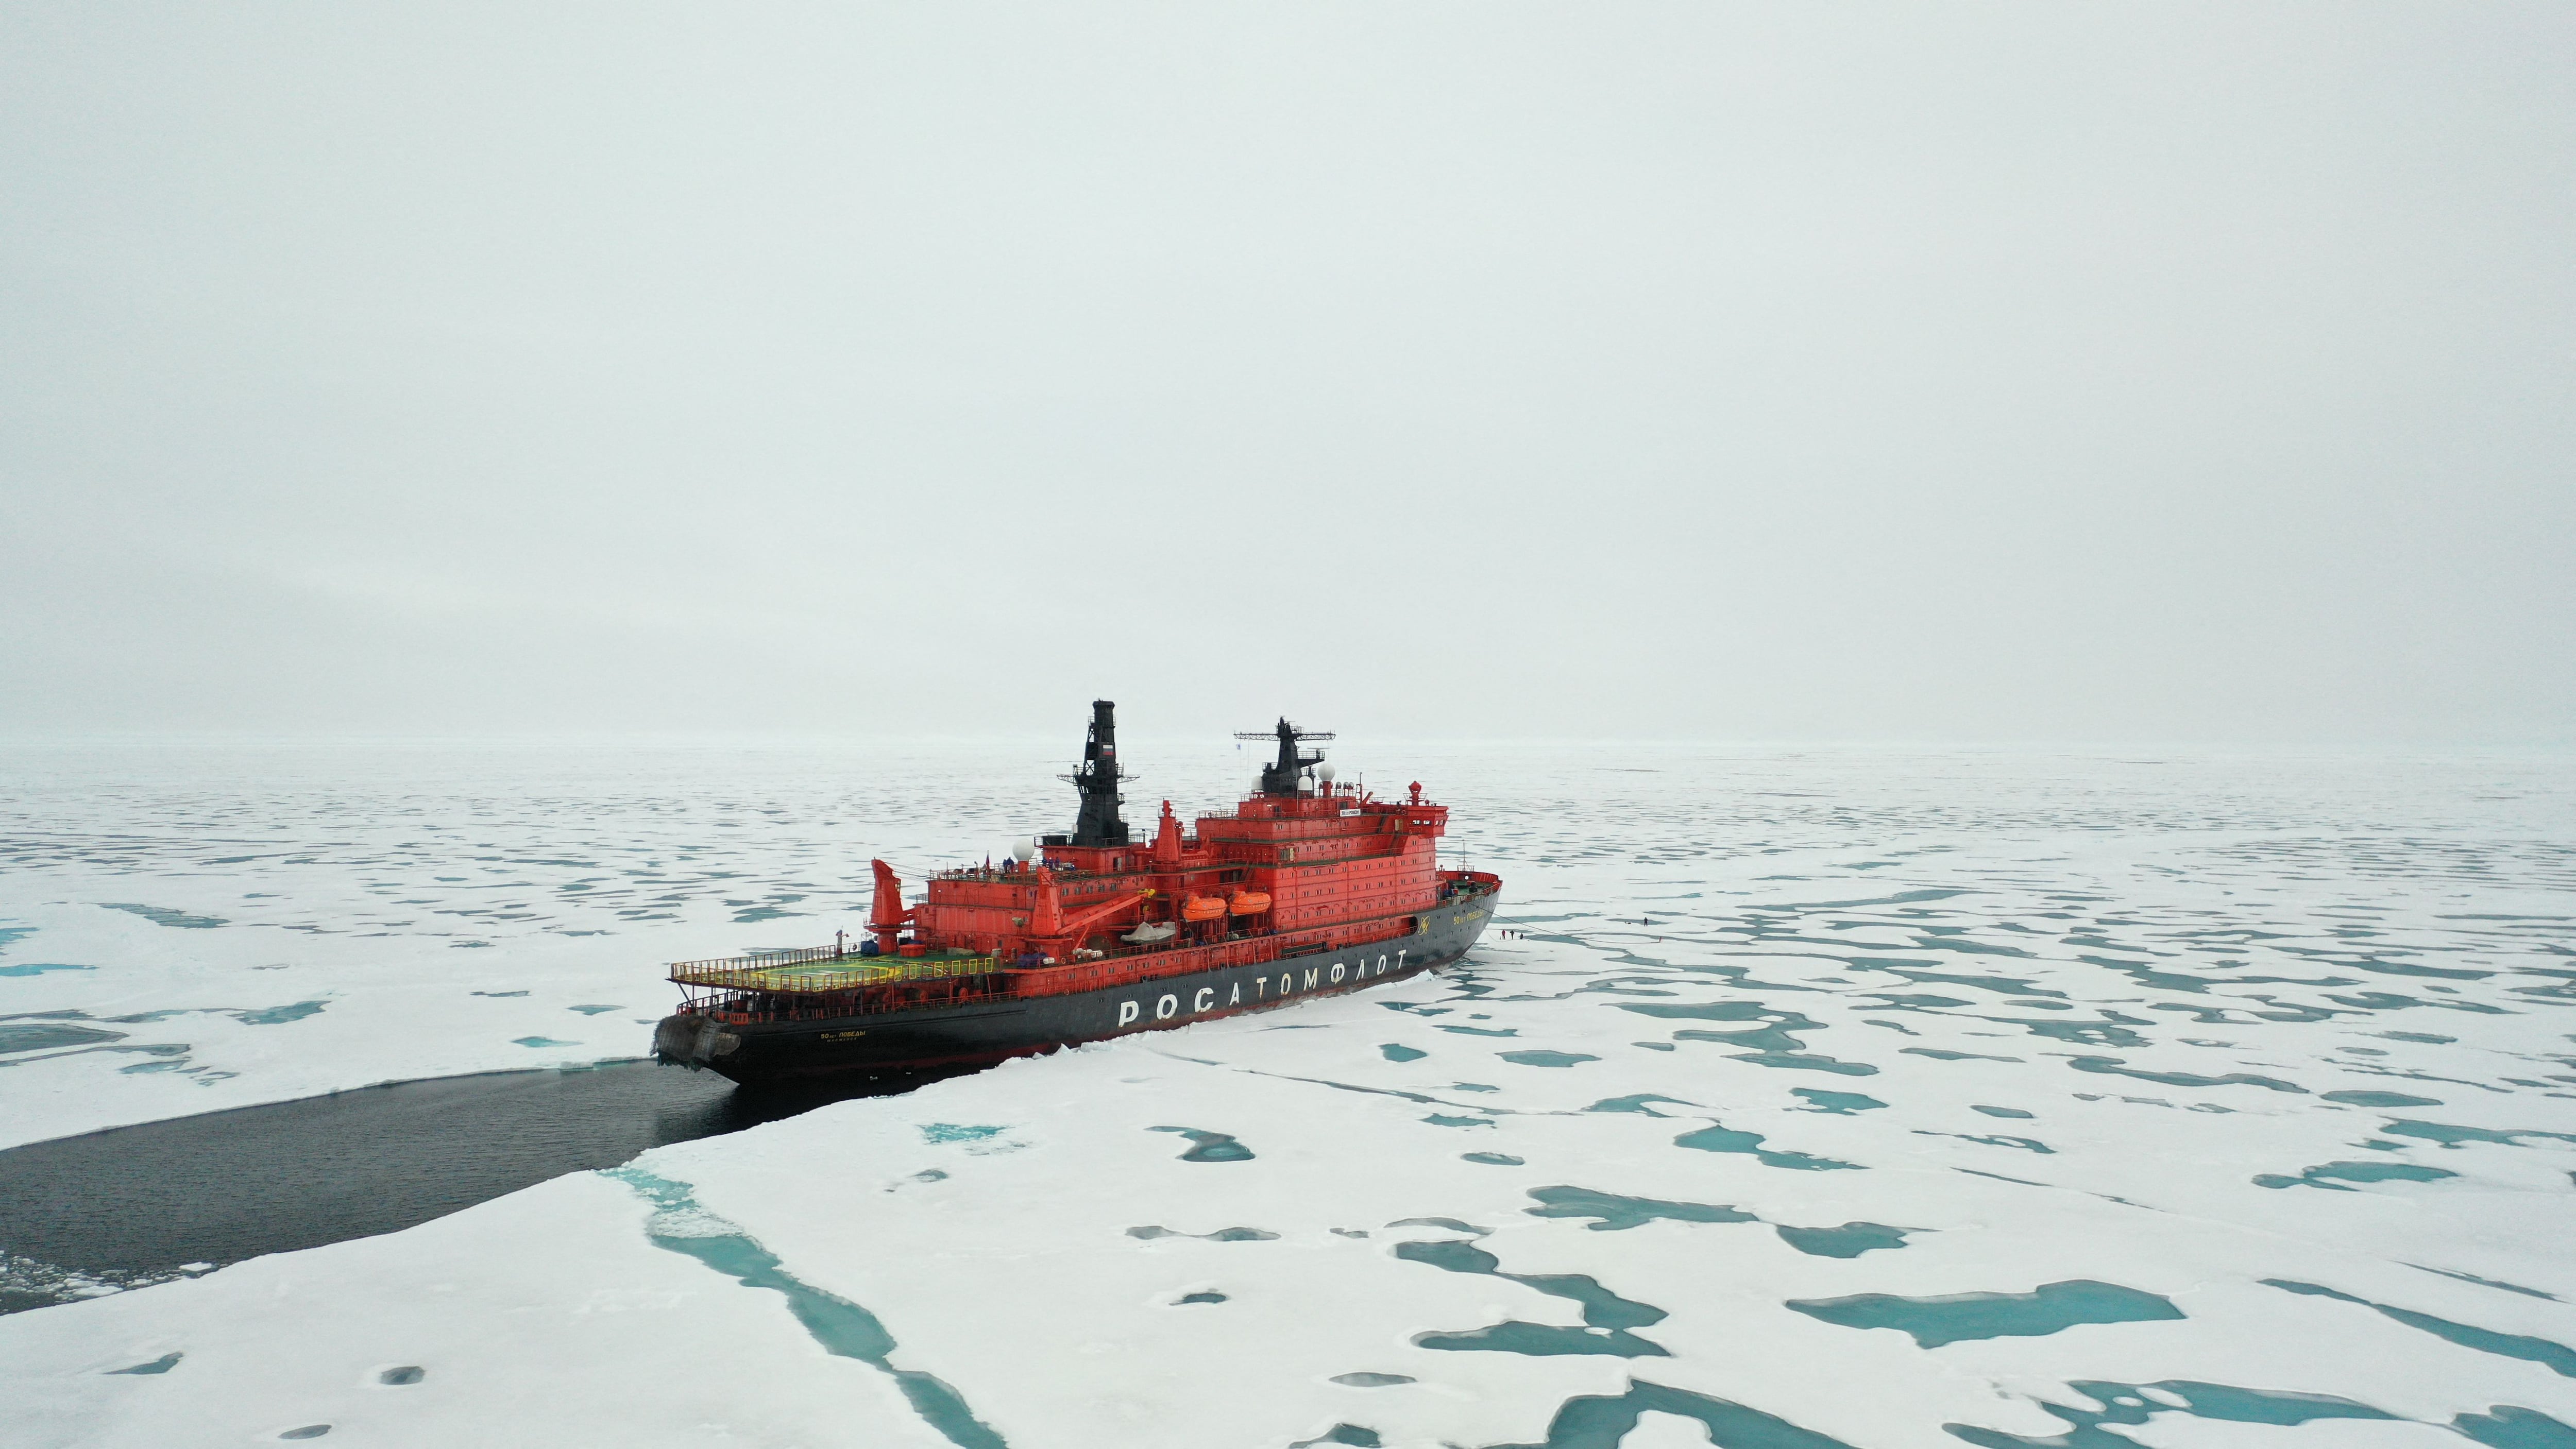 (FILES) The Russian "50 Years of Victory" nuclear-powered icebreaker is seen at the North Pole on August 18, 2021. From major investments to a built-up military presence, Russia has been making moves left and right in its drive to open a northern maritime route linking Asia and Europe. Moscow hopes these Arctic ambitions, made possible by global warming and the consequent melting glaciers, will enable it to redirect its hydrocarbons -- now under Western sanctions -- to Asia. Faced with challenges to the economy, Russian President Vladimir Putin has called the development of the Northern Sea Route "one of the obvious strategic priorities". (Photo by Ekaterina ANISIMOVA / AFP)